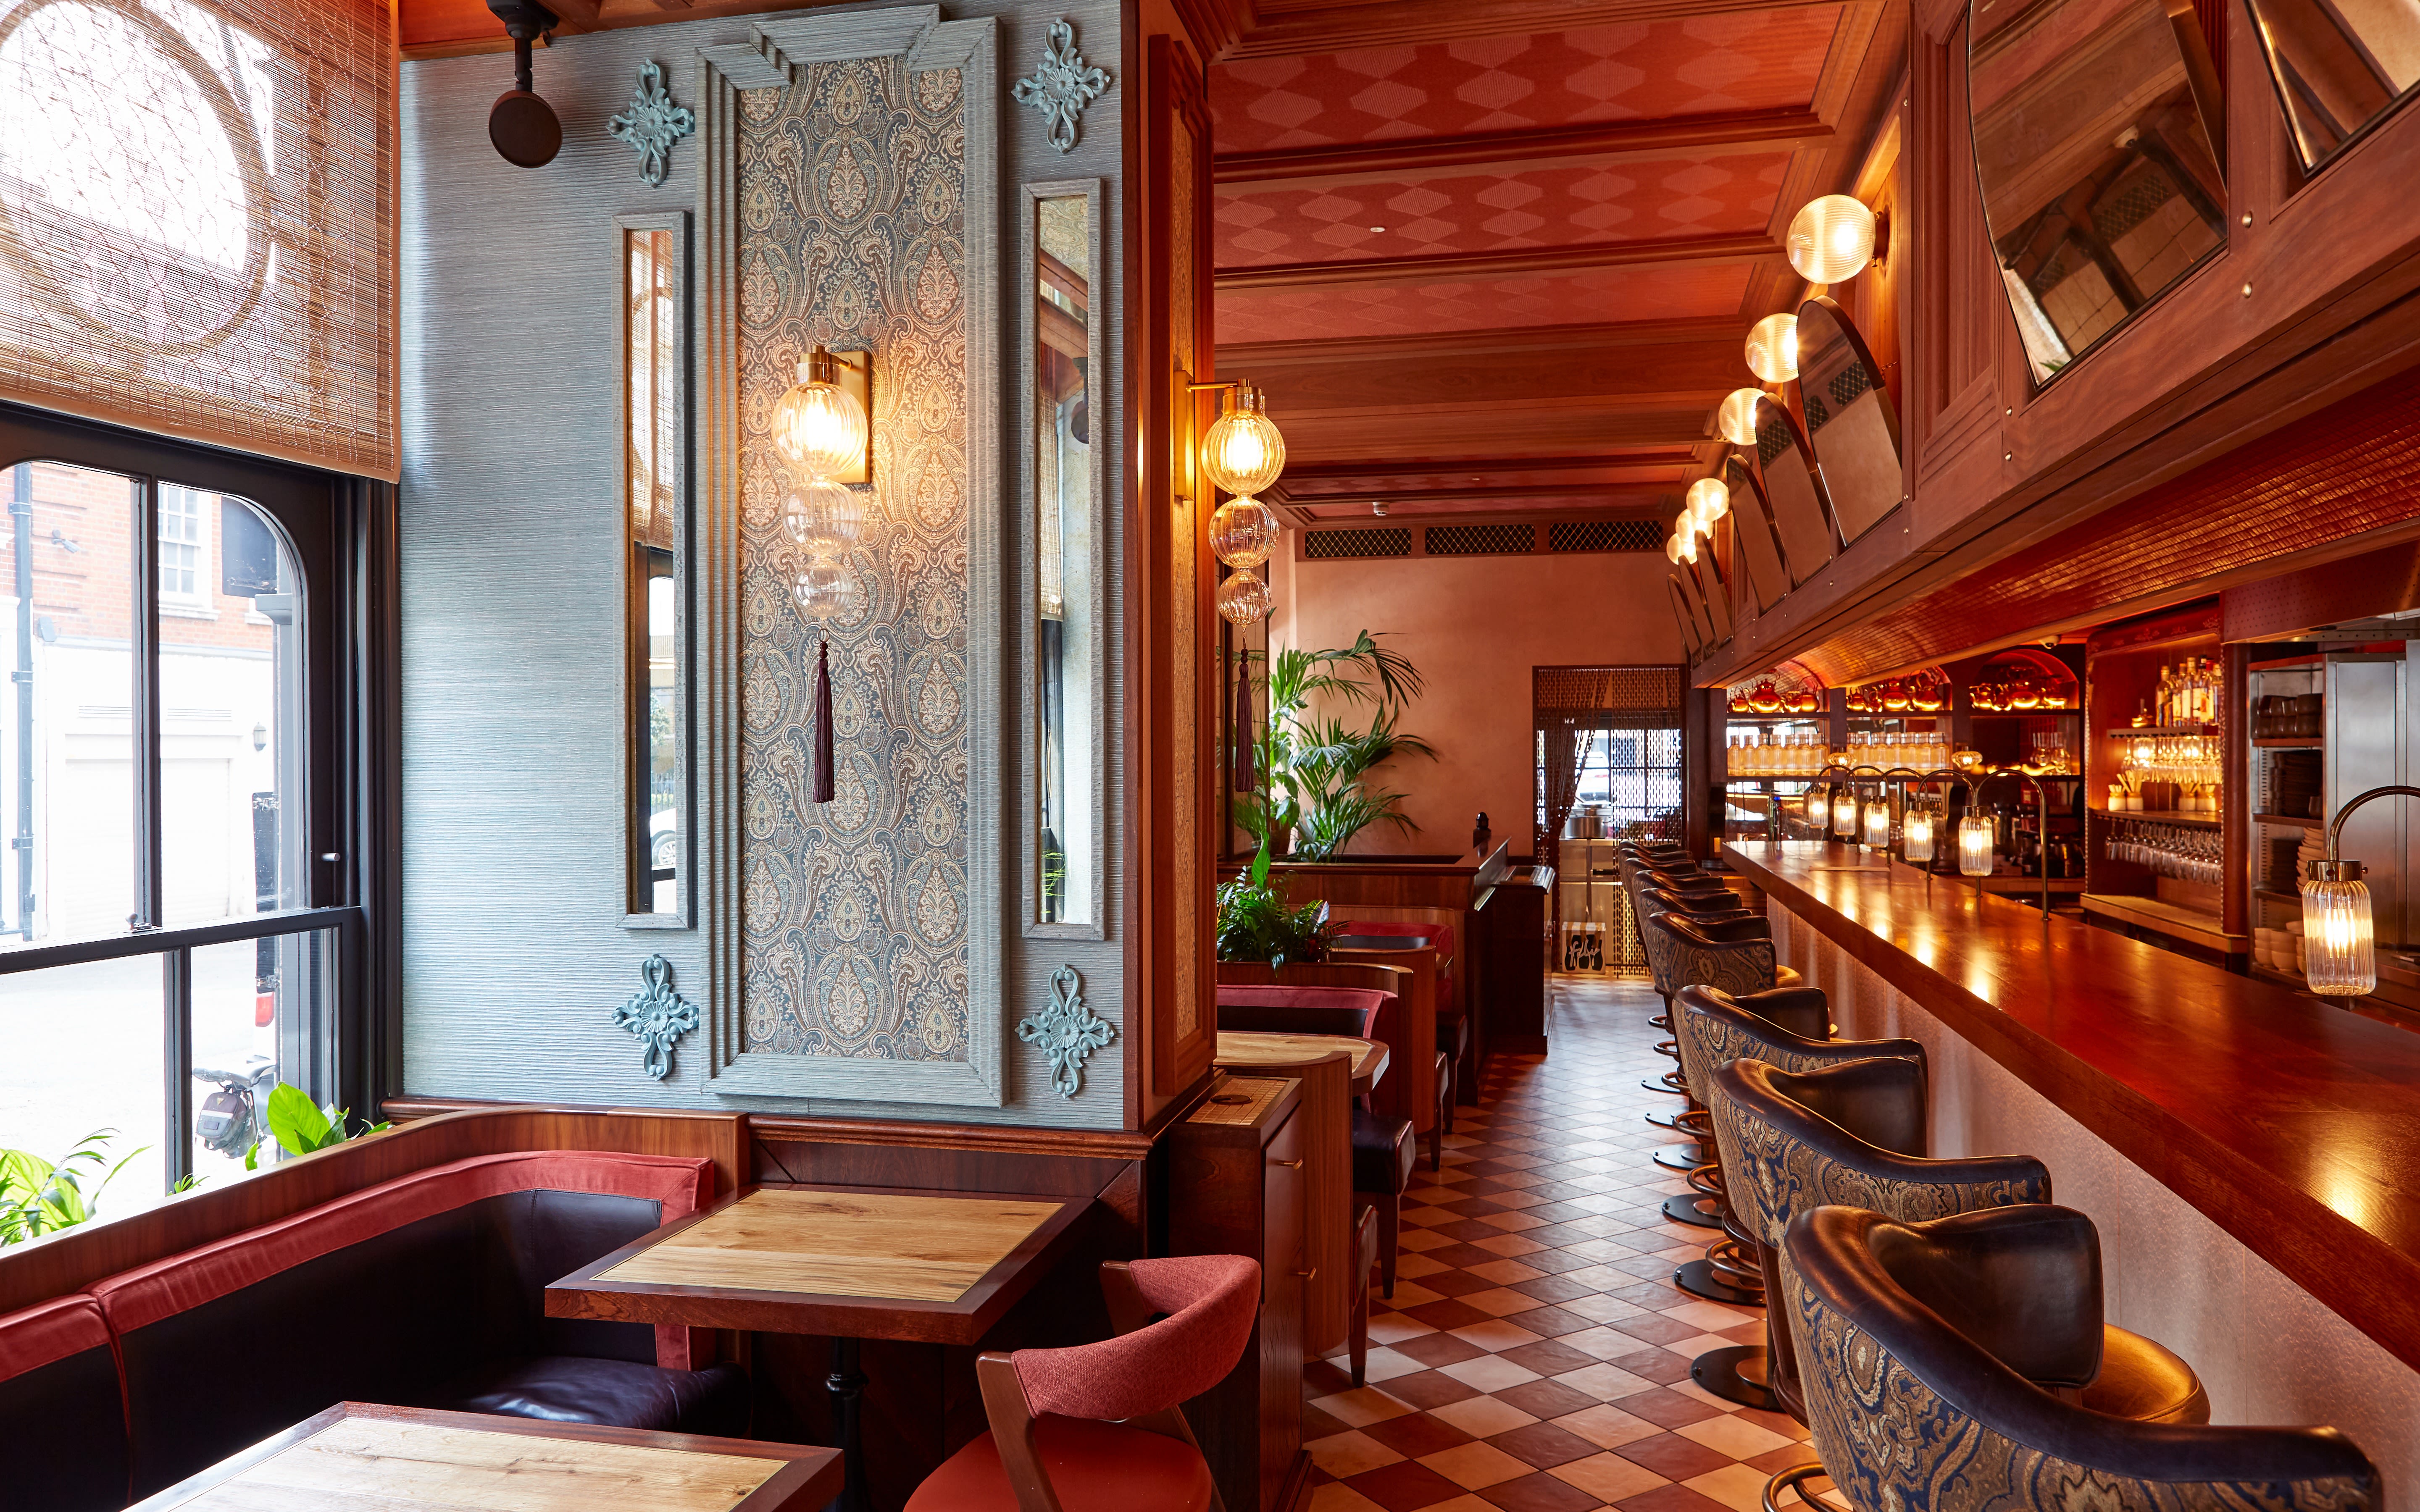 Image of the interior of Top 100 Restaurant for London, BiBi